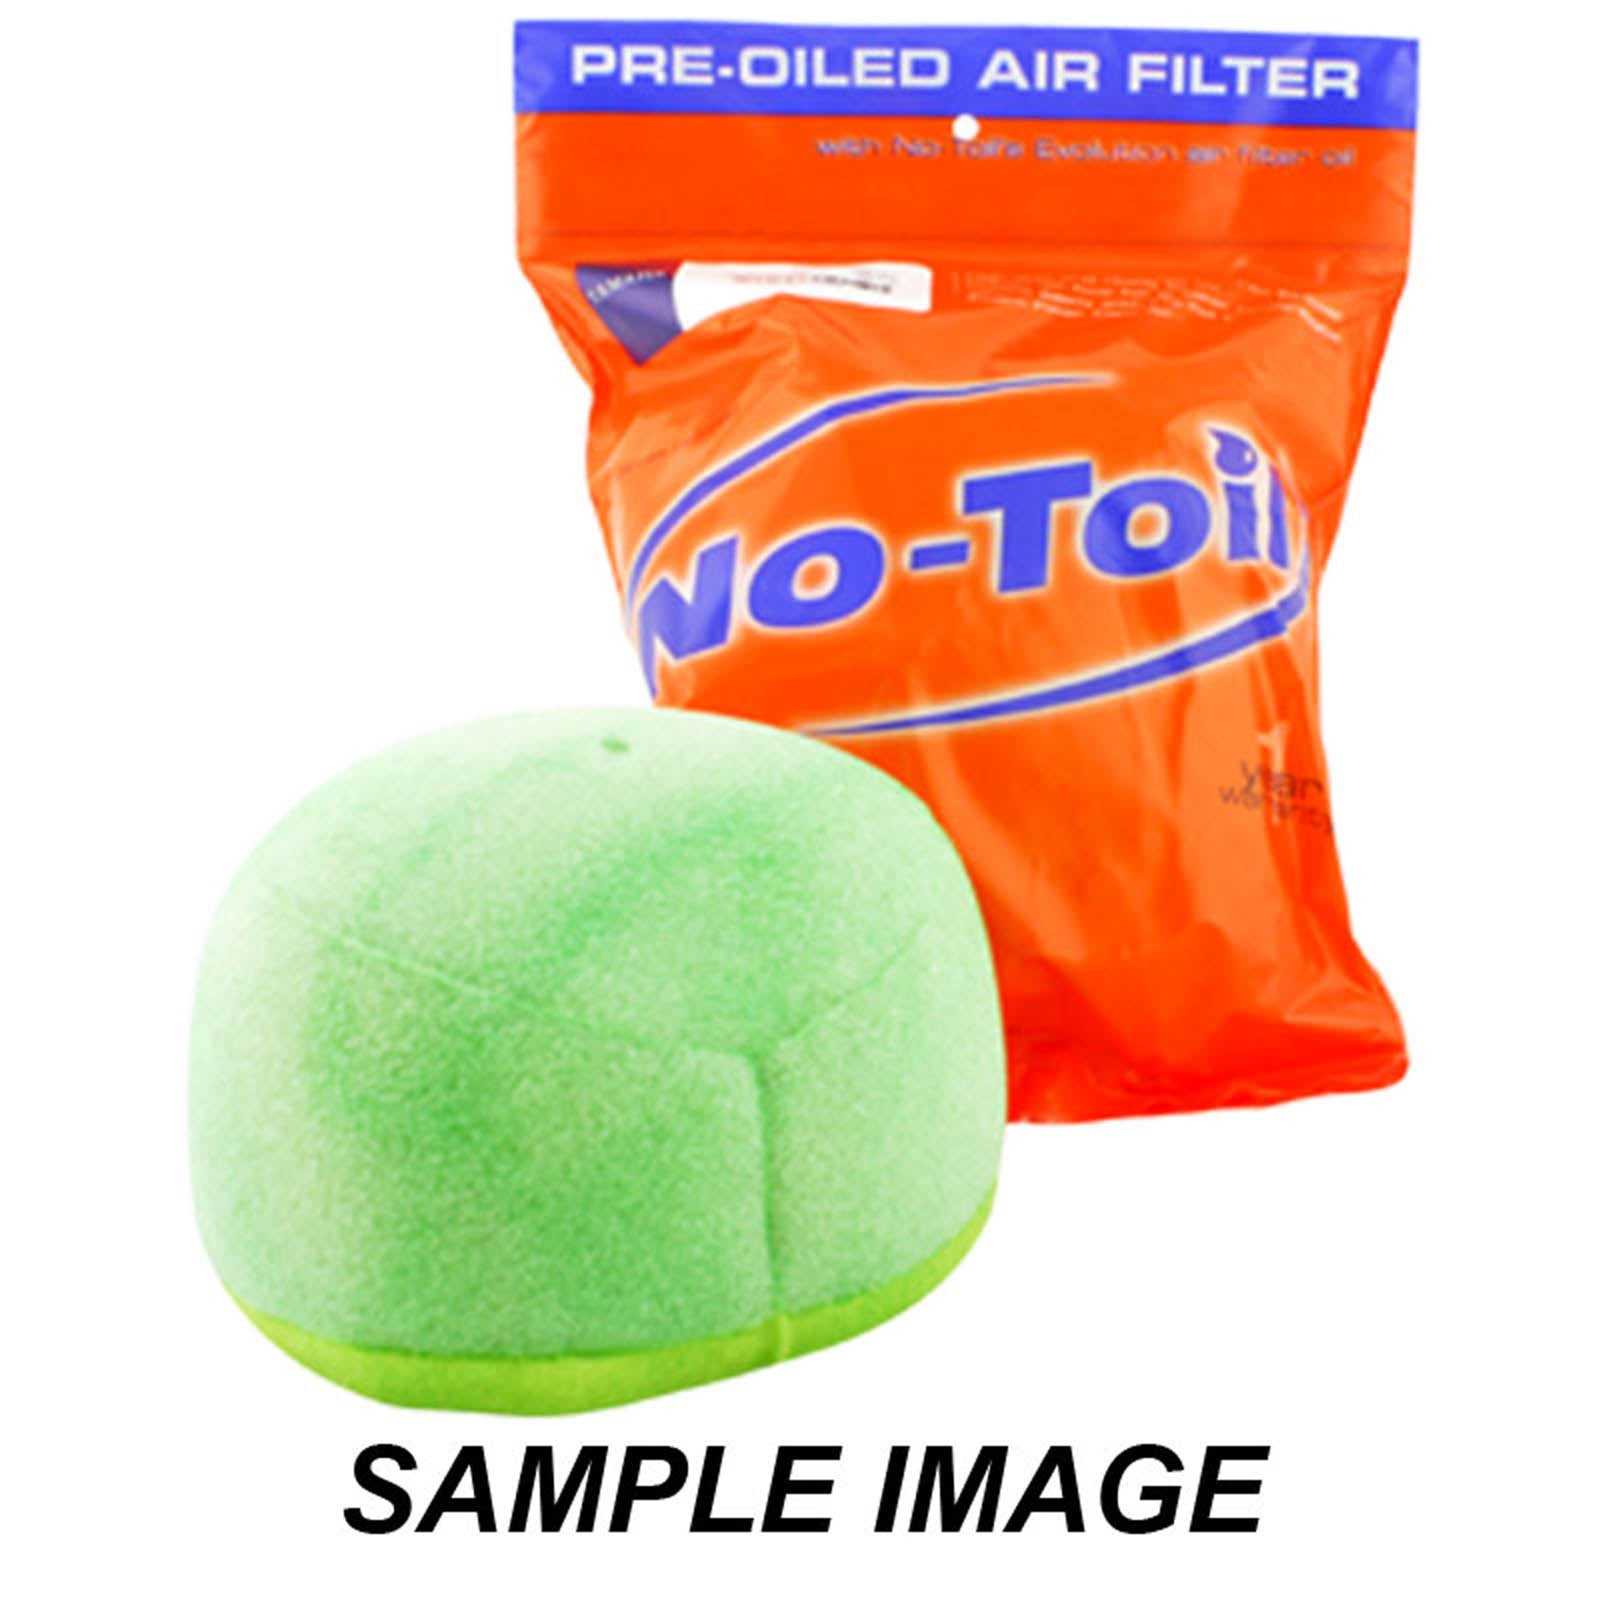 No-Toil, PRE-OILED FILTER HON XR250/350/400/600